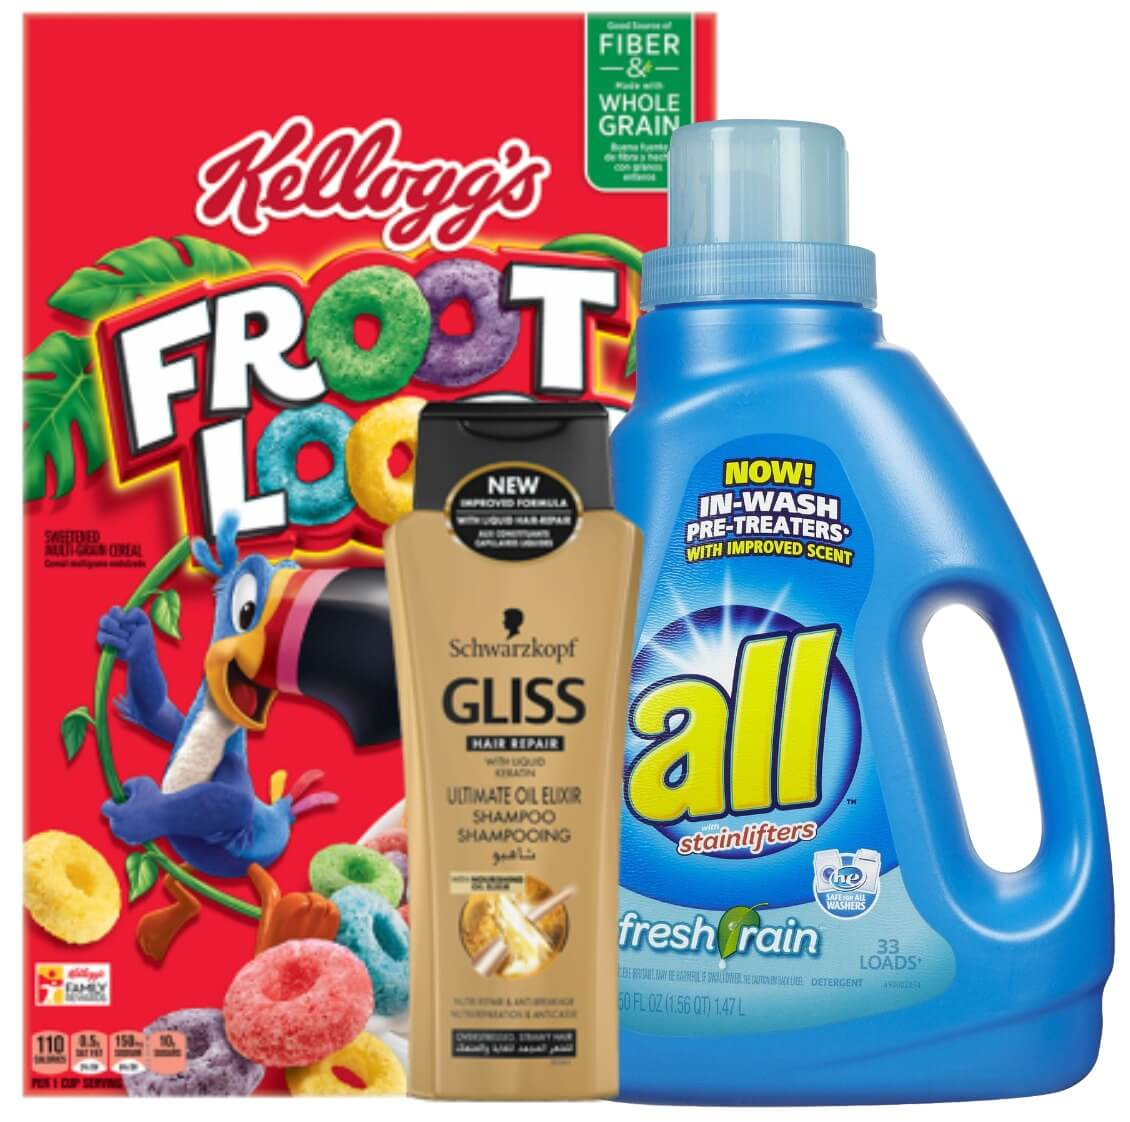 Today&amp;#039;s Top New Coupons - Save On Kellogg&amp;#039;s, All Laundry Detergent - Free All Detergent Printable Coupons